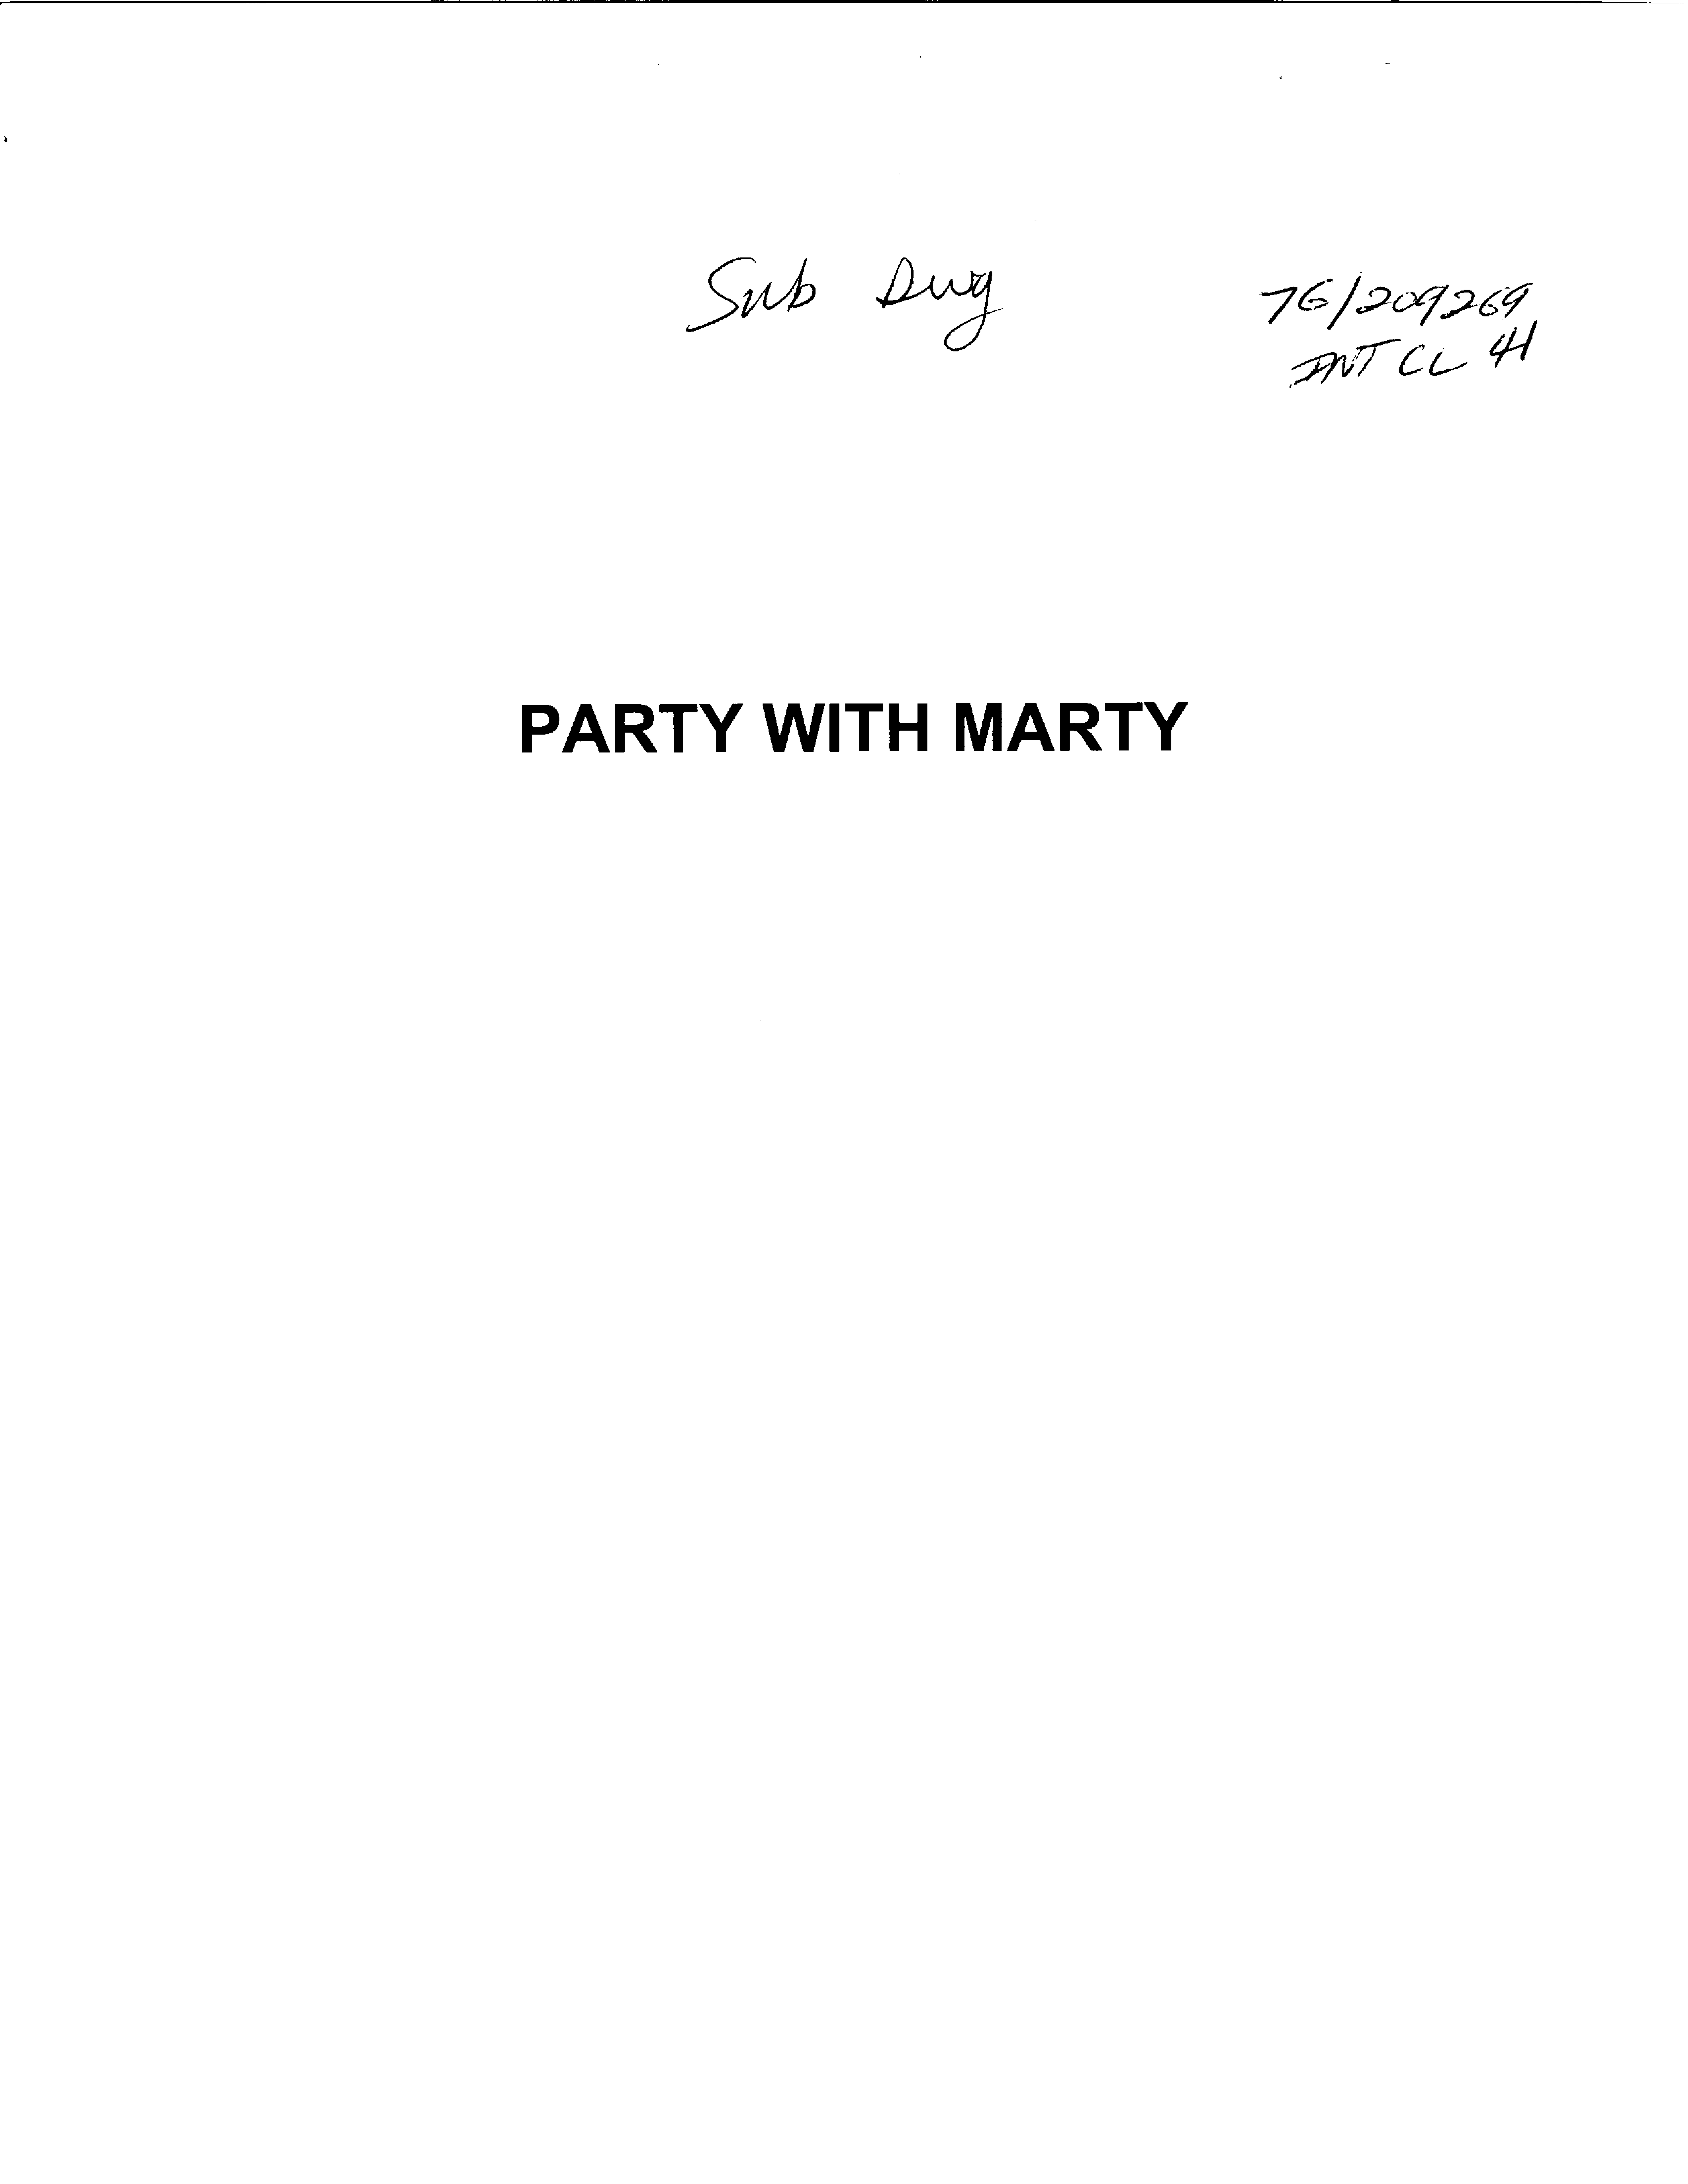 PARTY WITH MARTY